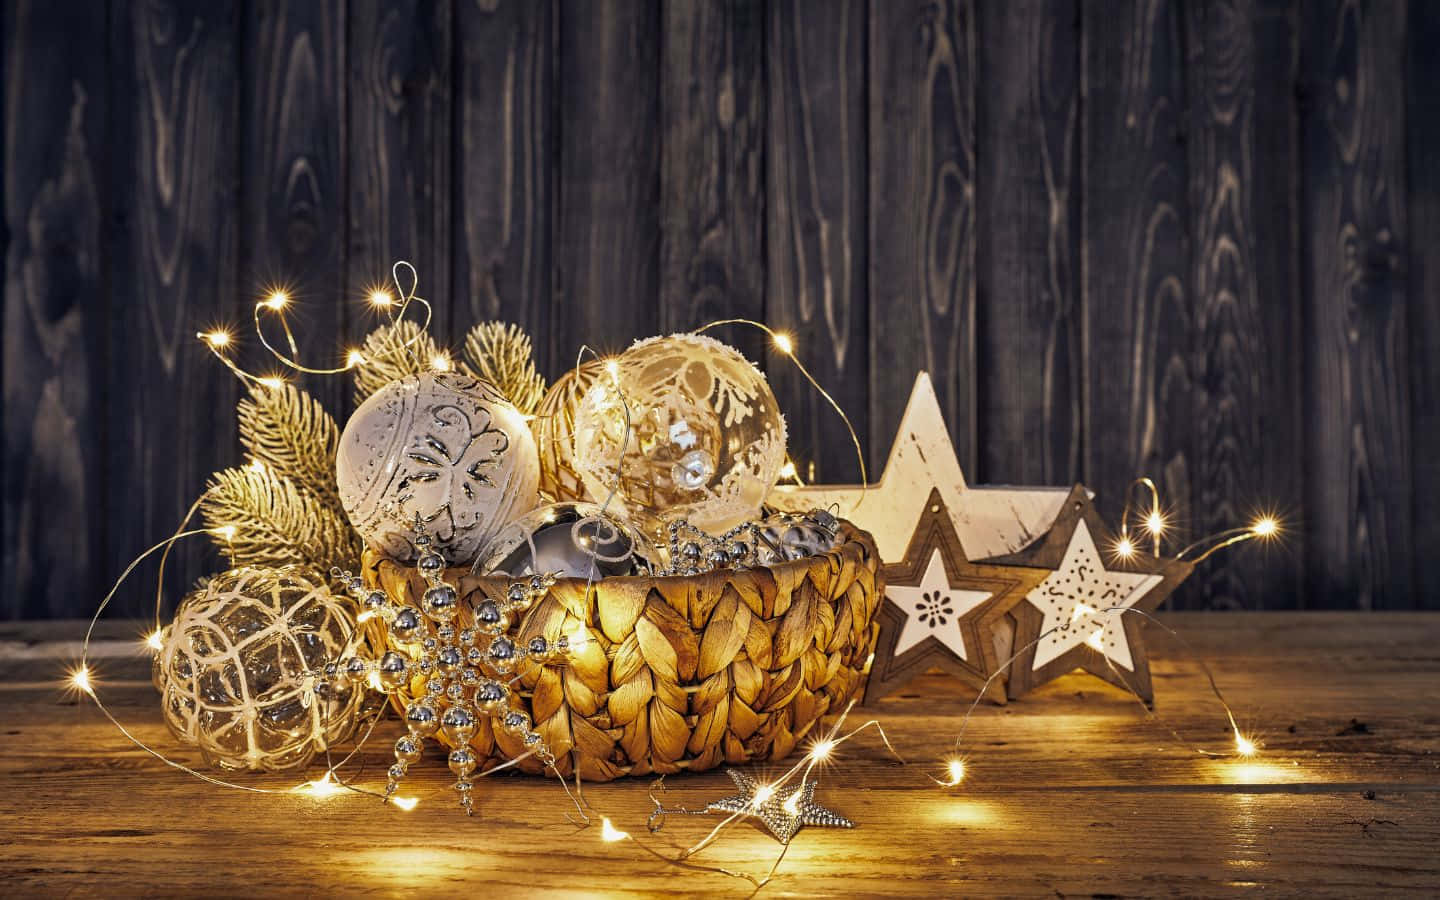 christmas decorations in a bowl on a wooden table Wallpaper